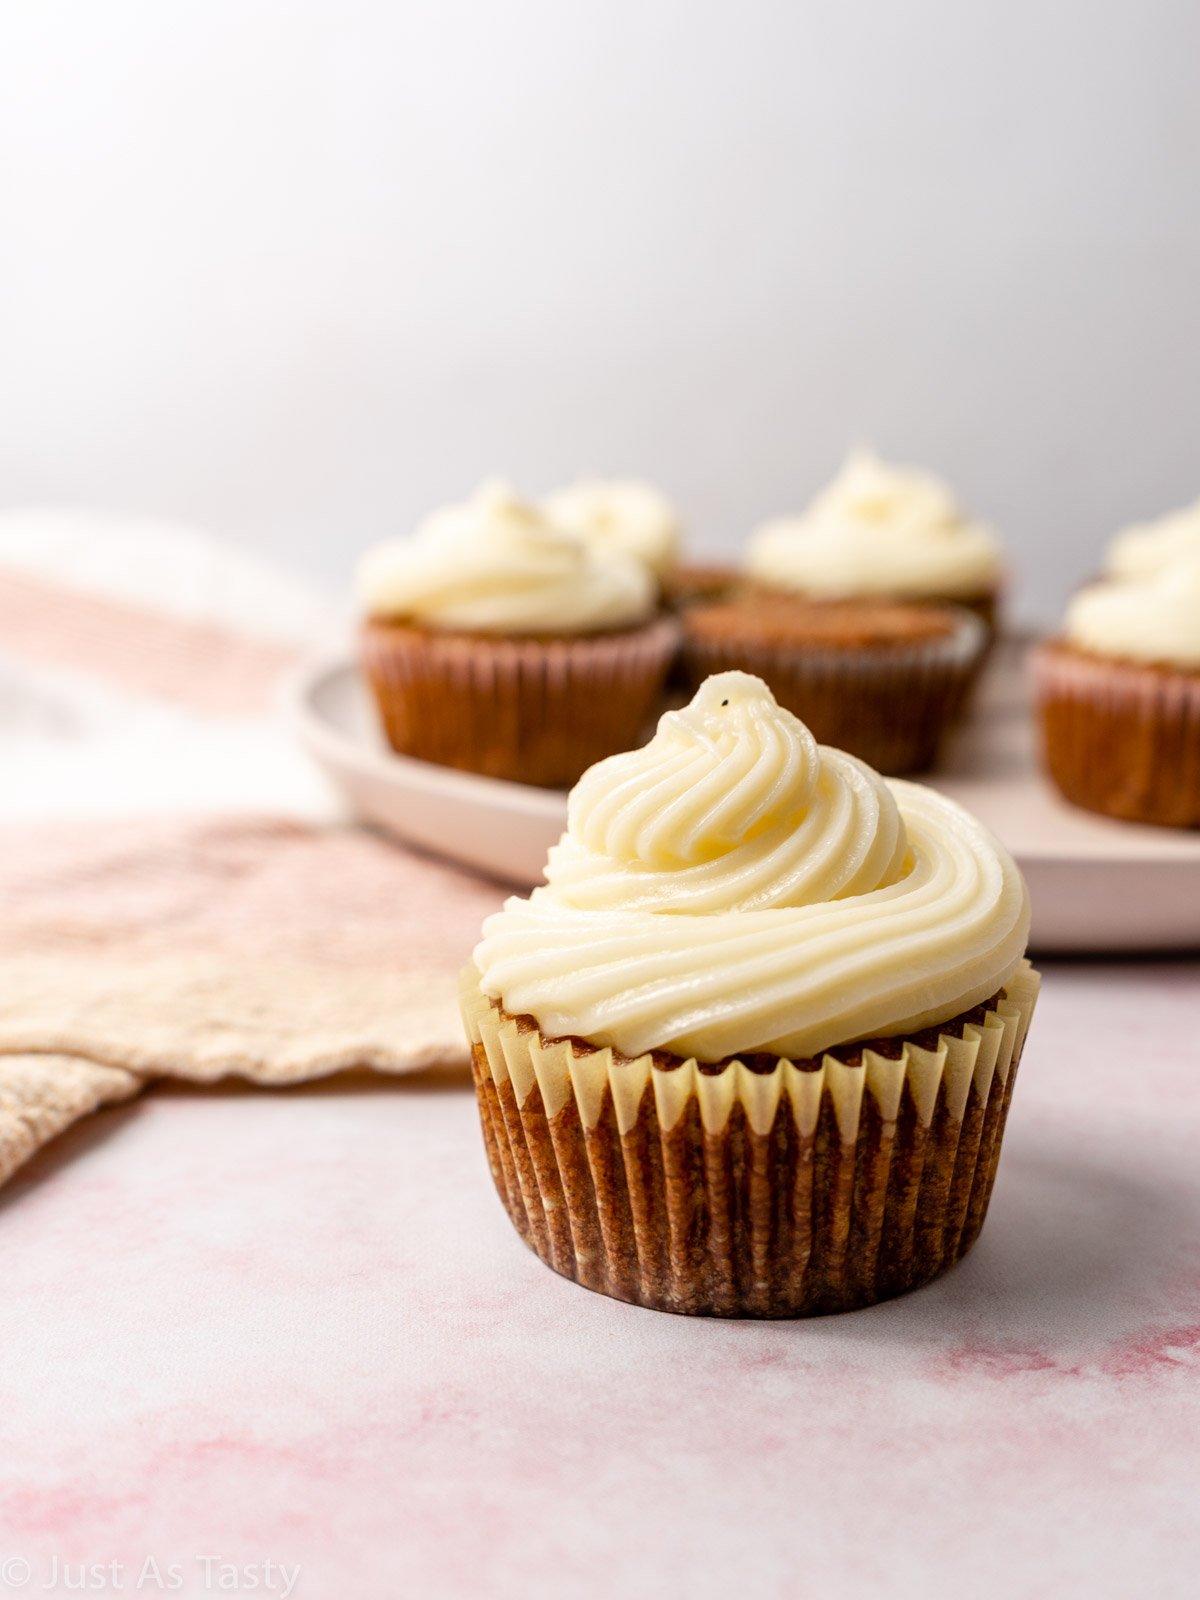 Gluten free carrot cake cupcake topped with cream cheese frosting.